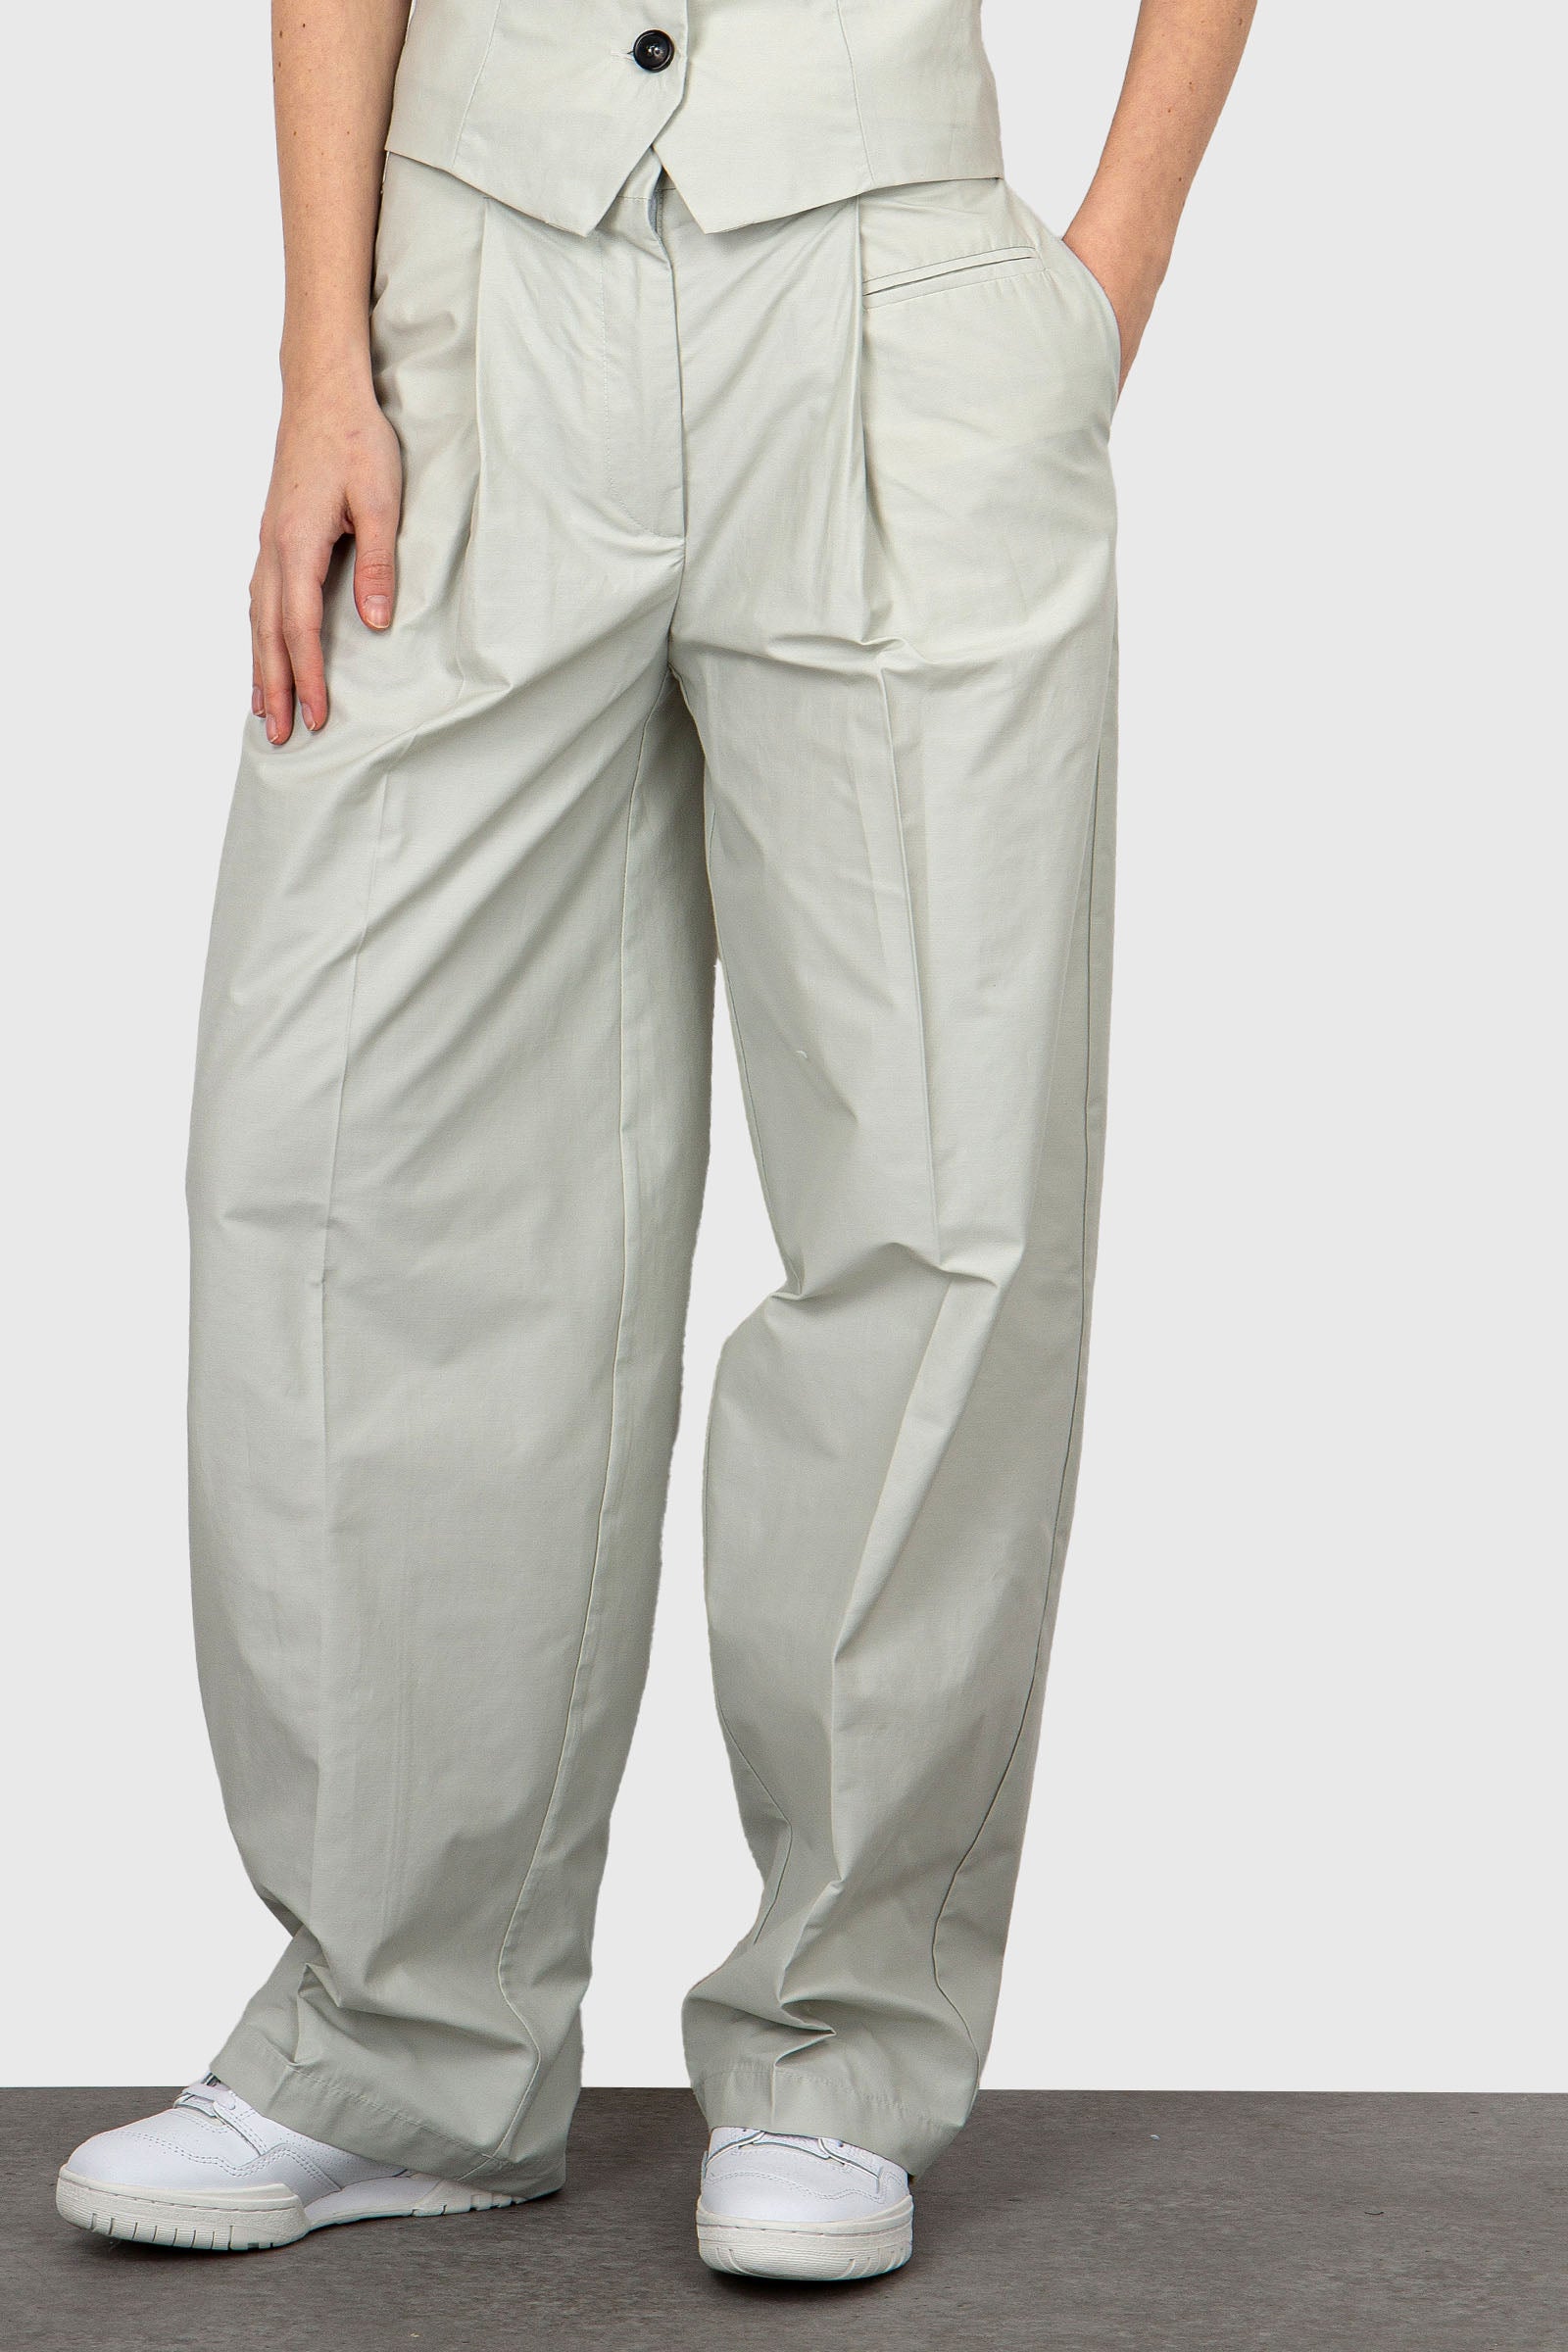 Grifoni Banana Trousers in Ice Cotton - 1